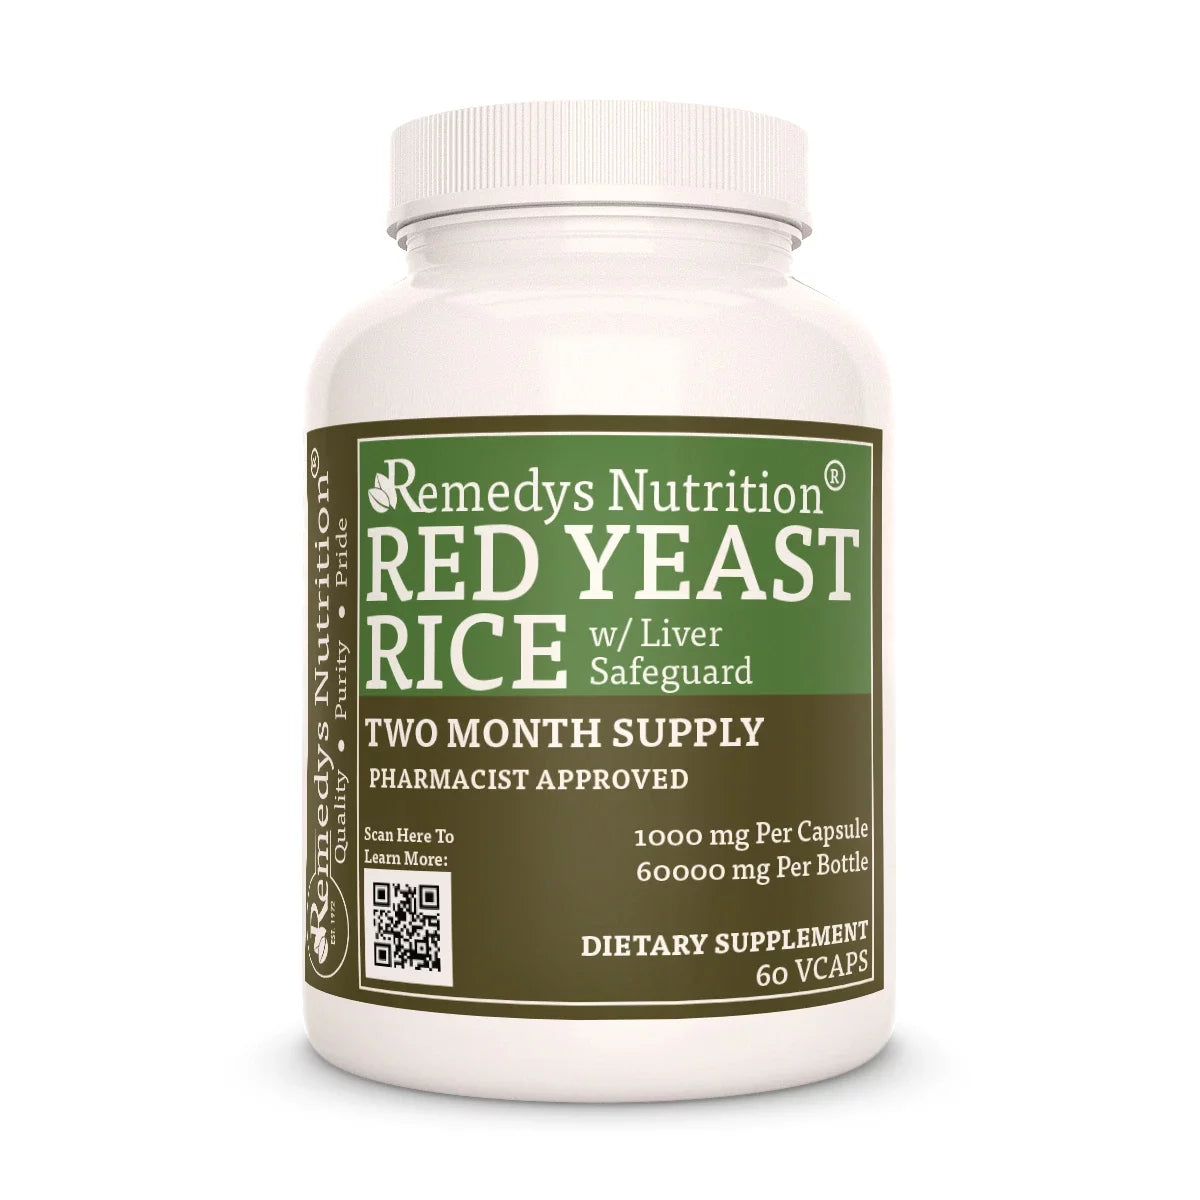 Image of Remedy's Red Yeast Rice w/ Liver Safeguard™ Capsules Herbal Dietary Supplement front bottle. Made USA Milk Thistle.